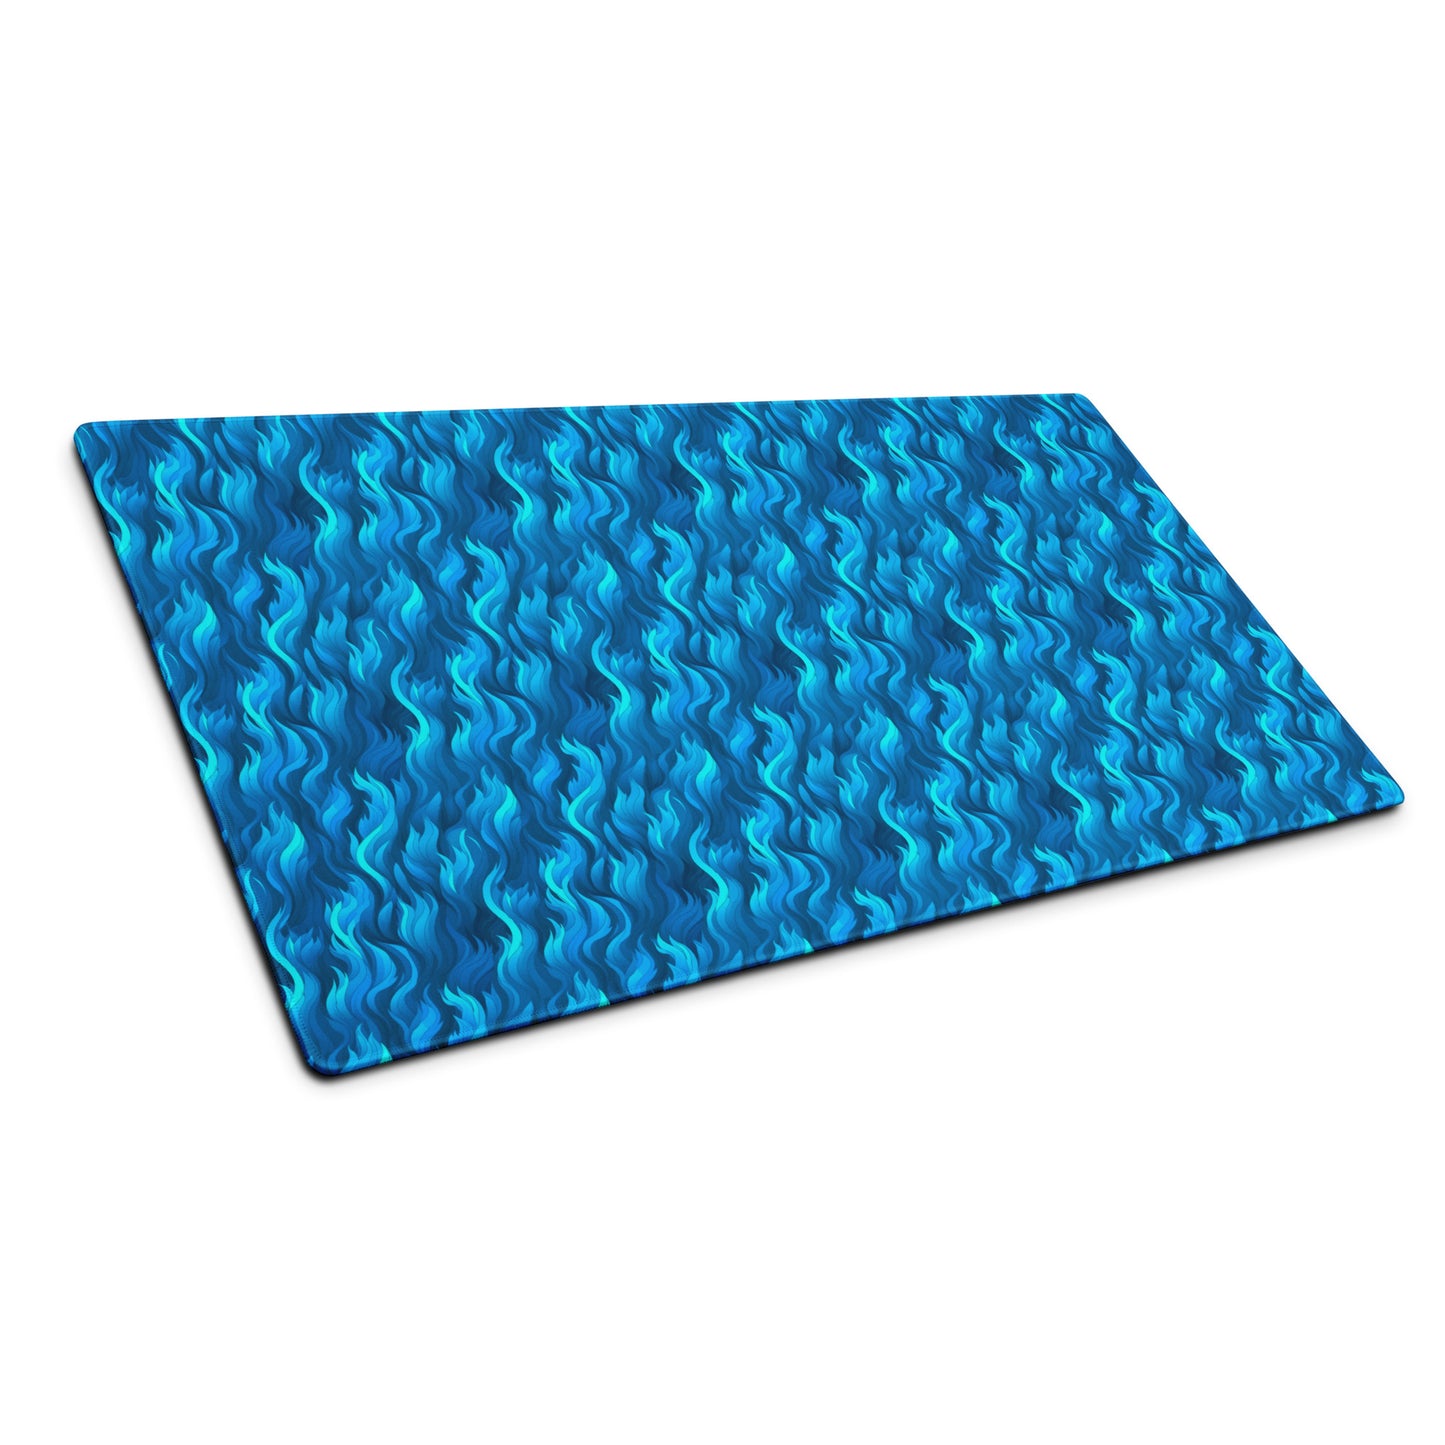 A 36" x 18" desk pad with a wavy flame pattern on it shown at an angle. Blue in color.